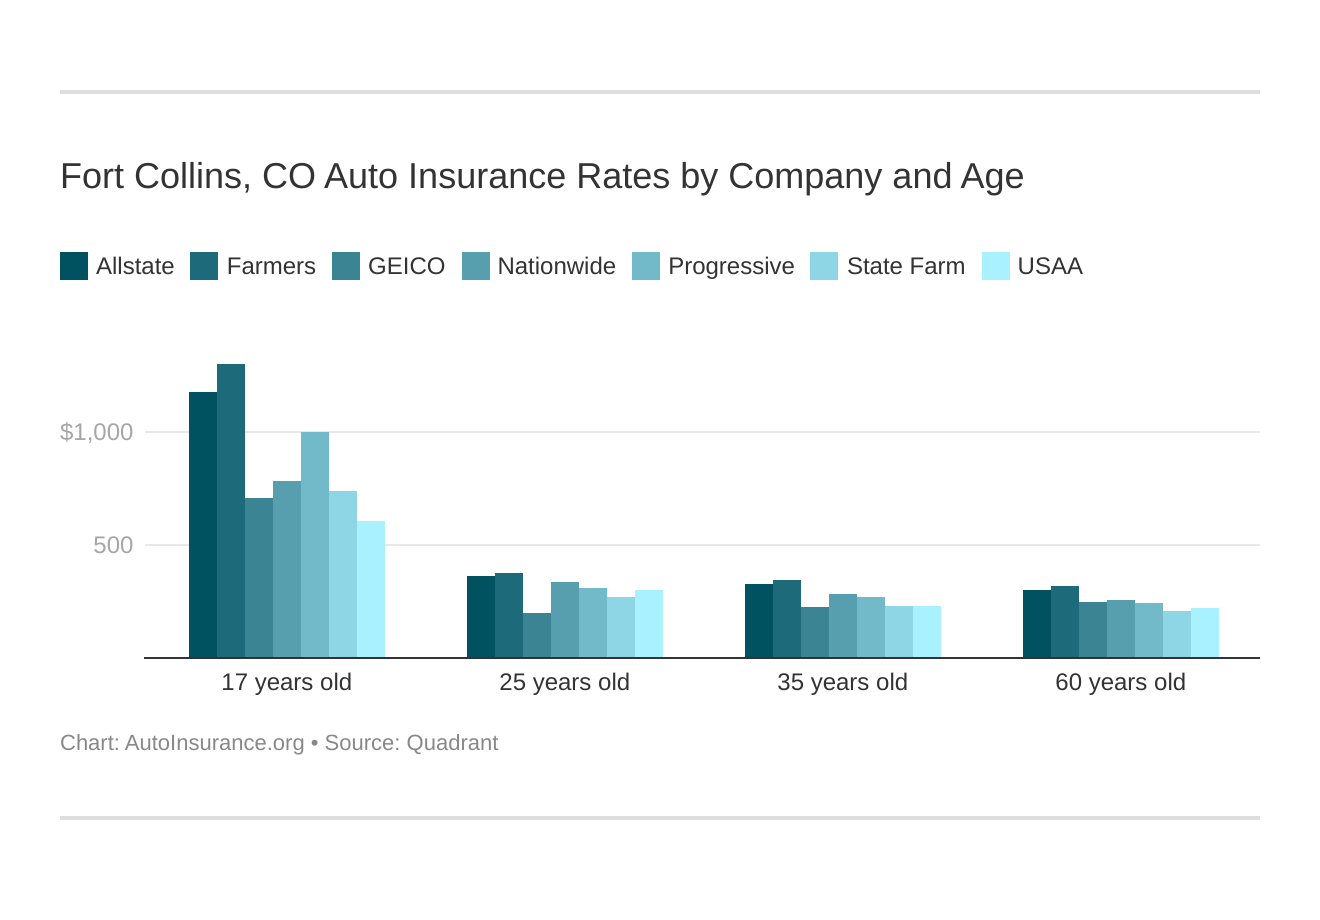 Fort Collins, CO Auto Insurance Rates by Company and Age